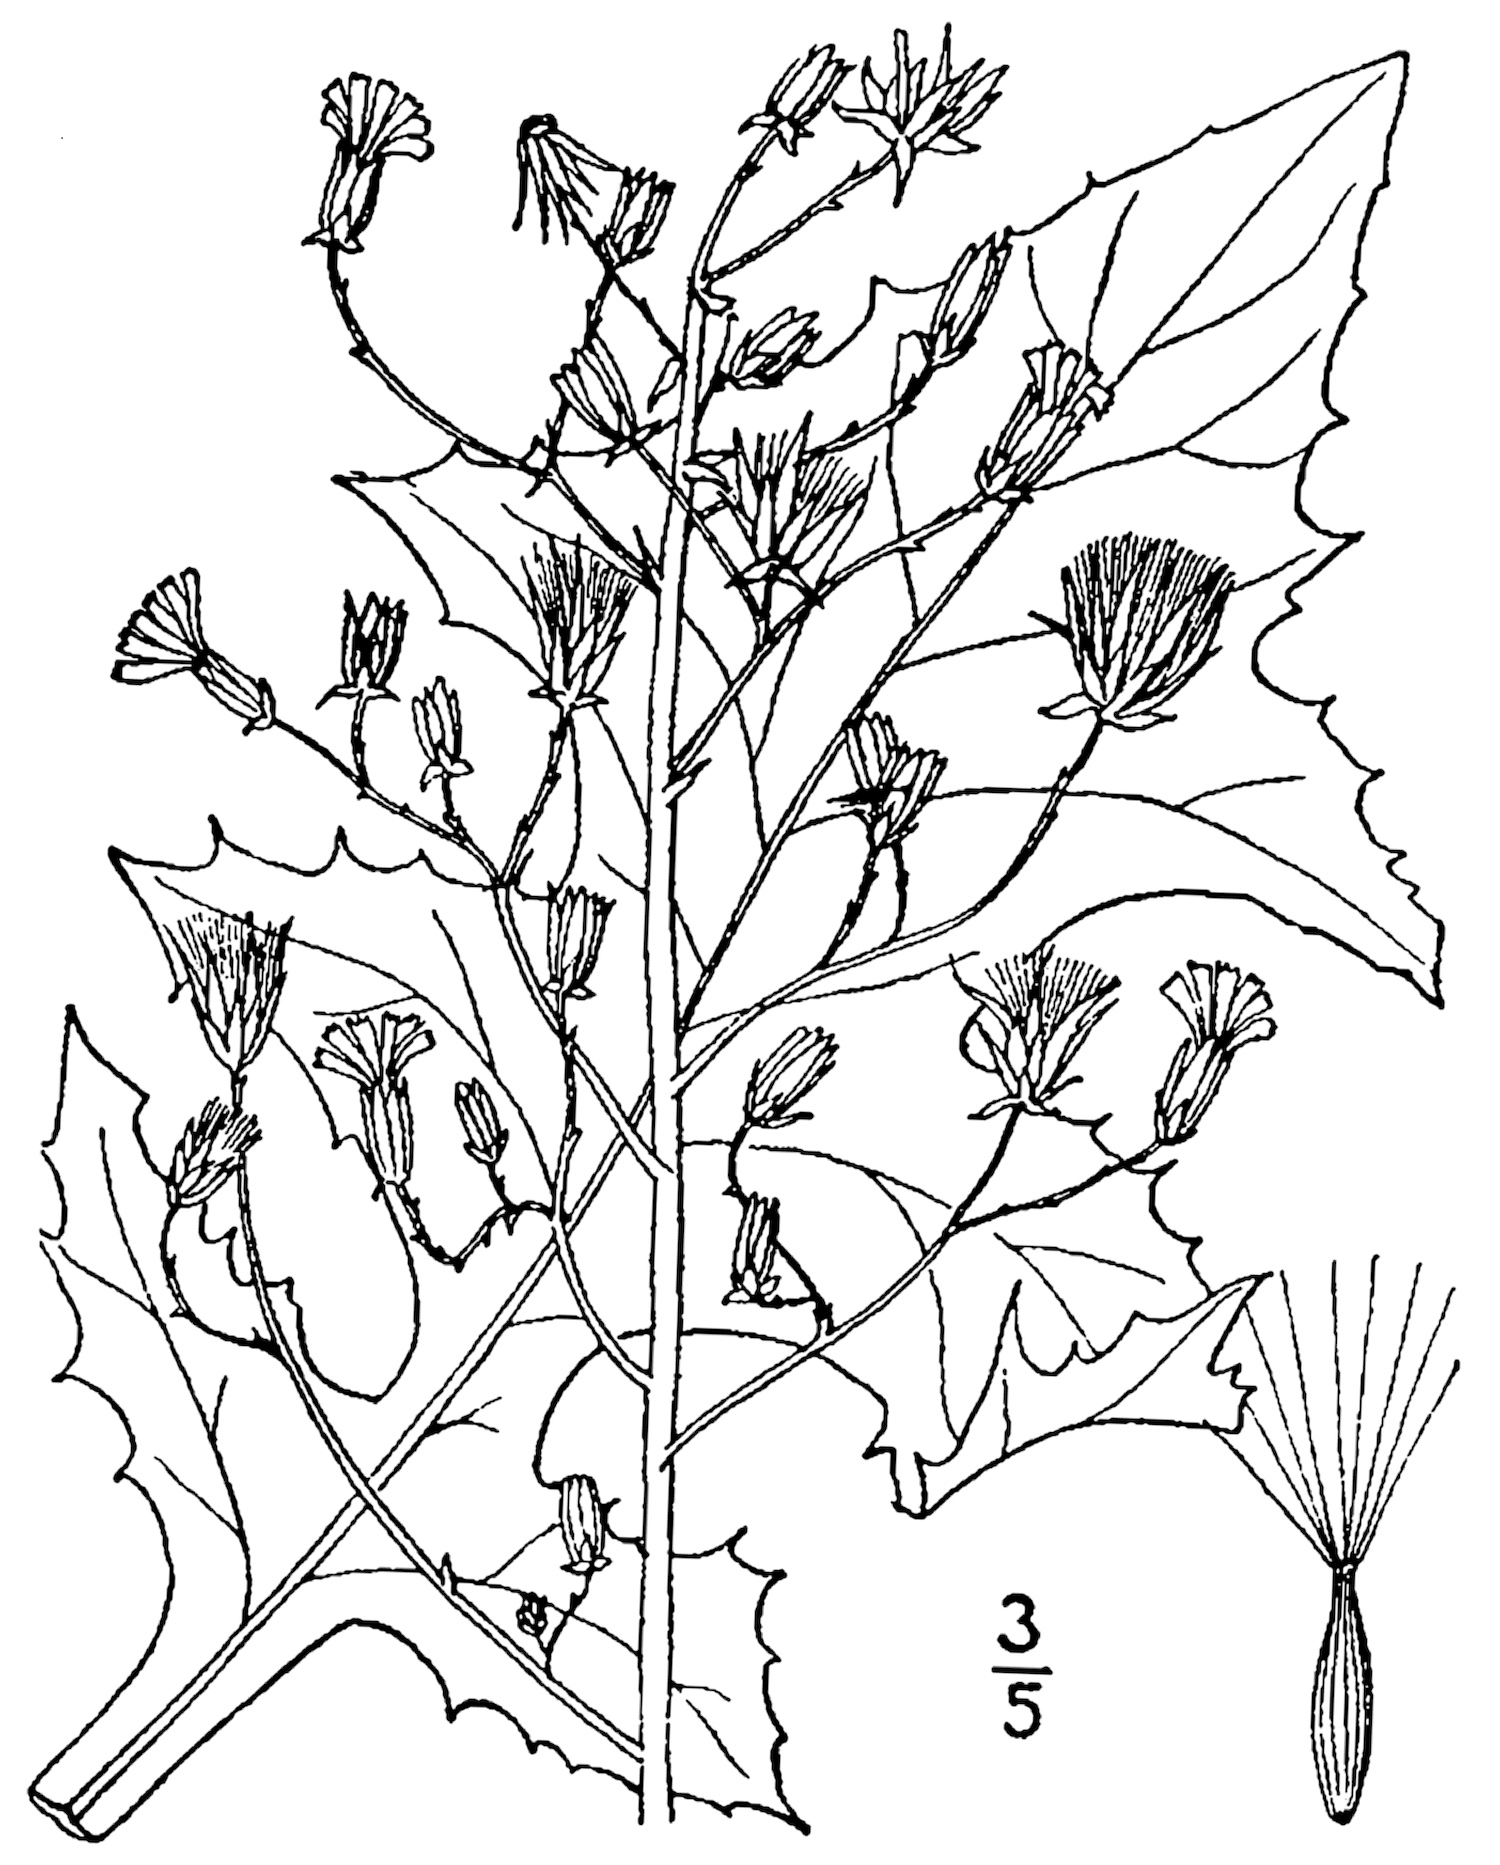 1913 botanical drawing of Tall Blue Lettuce.